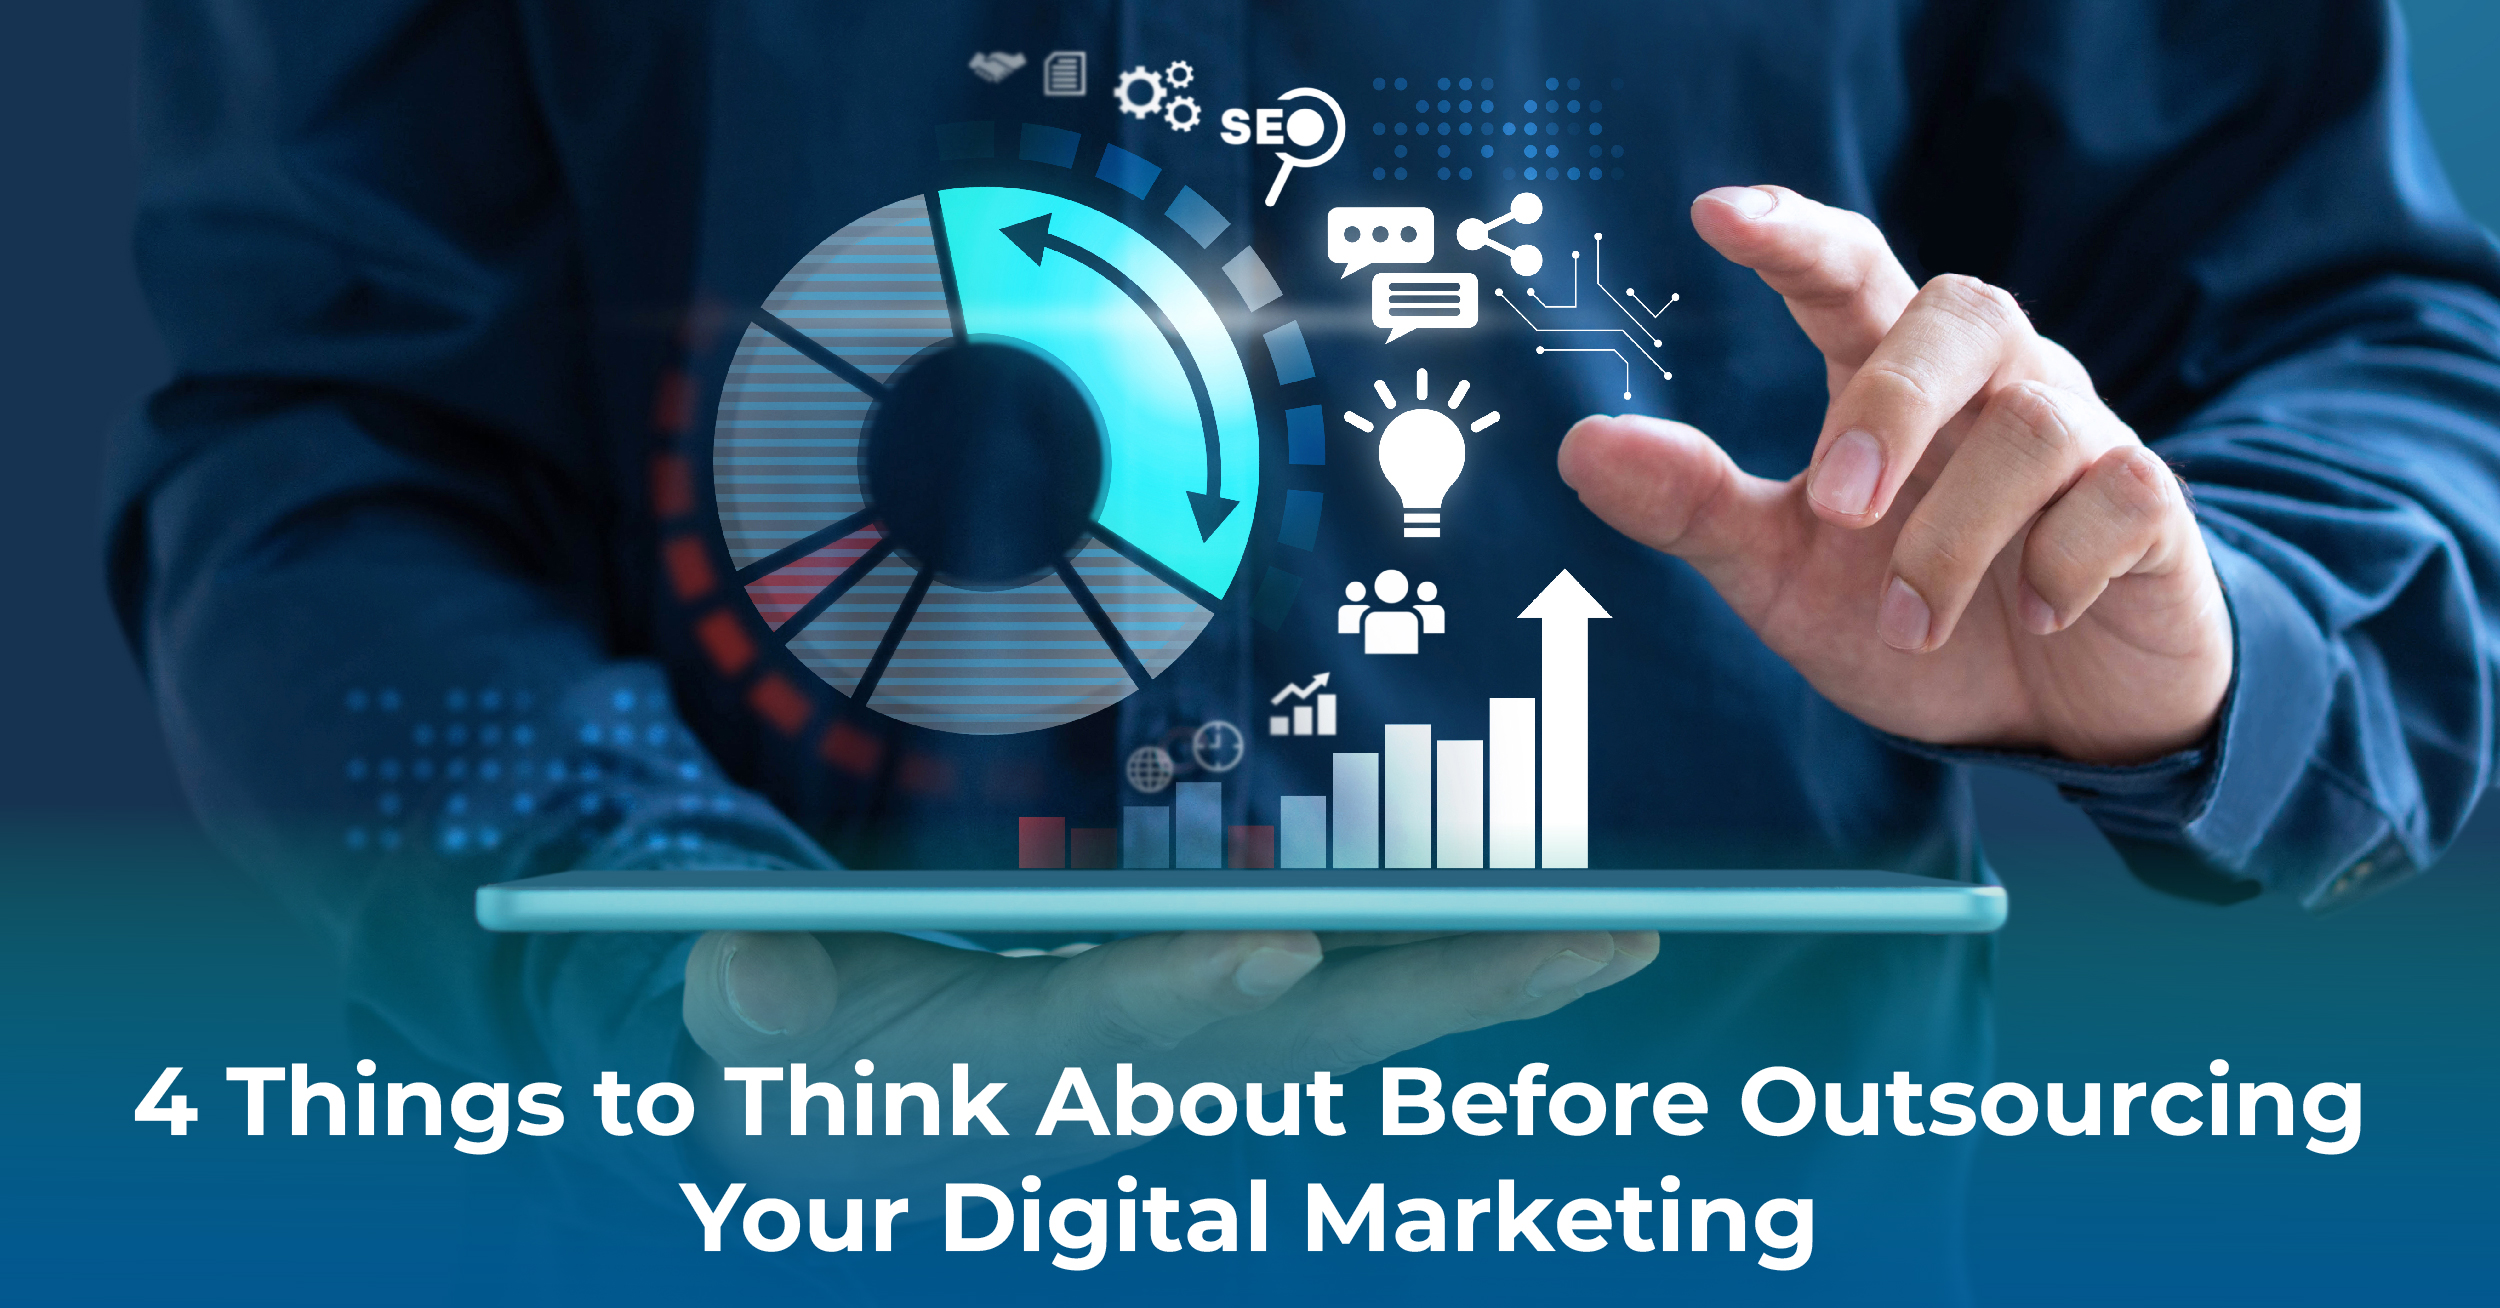 4 Things to Think About Before Outsourcing Your Digital Marketing